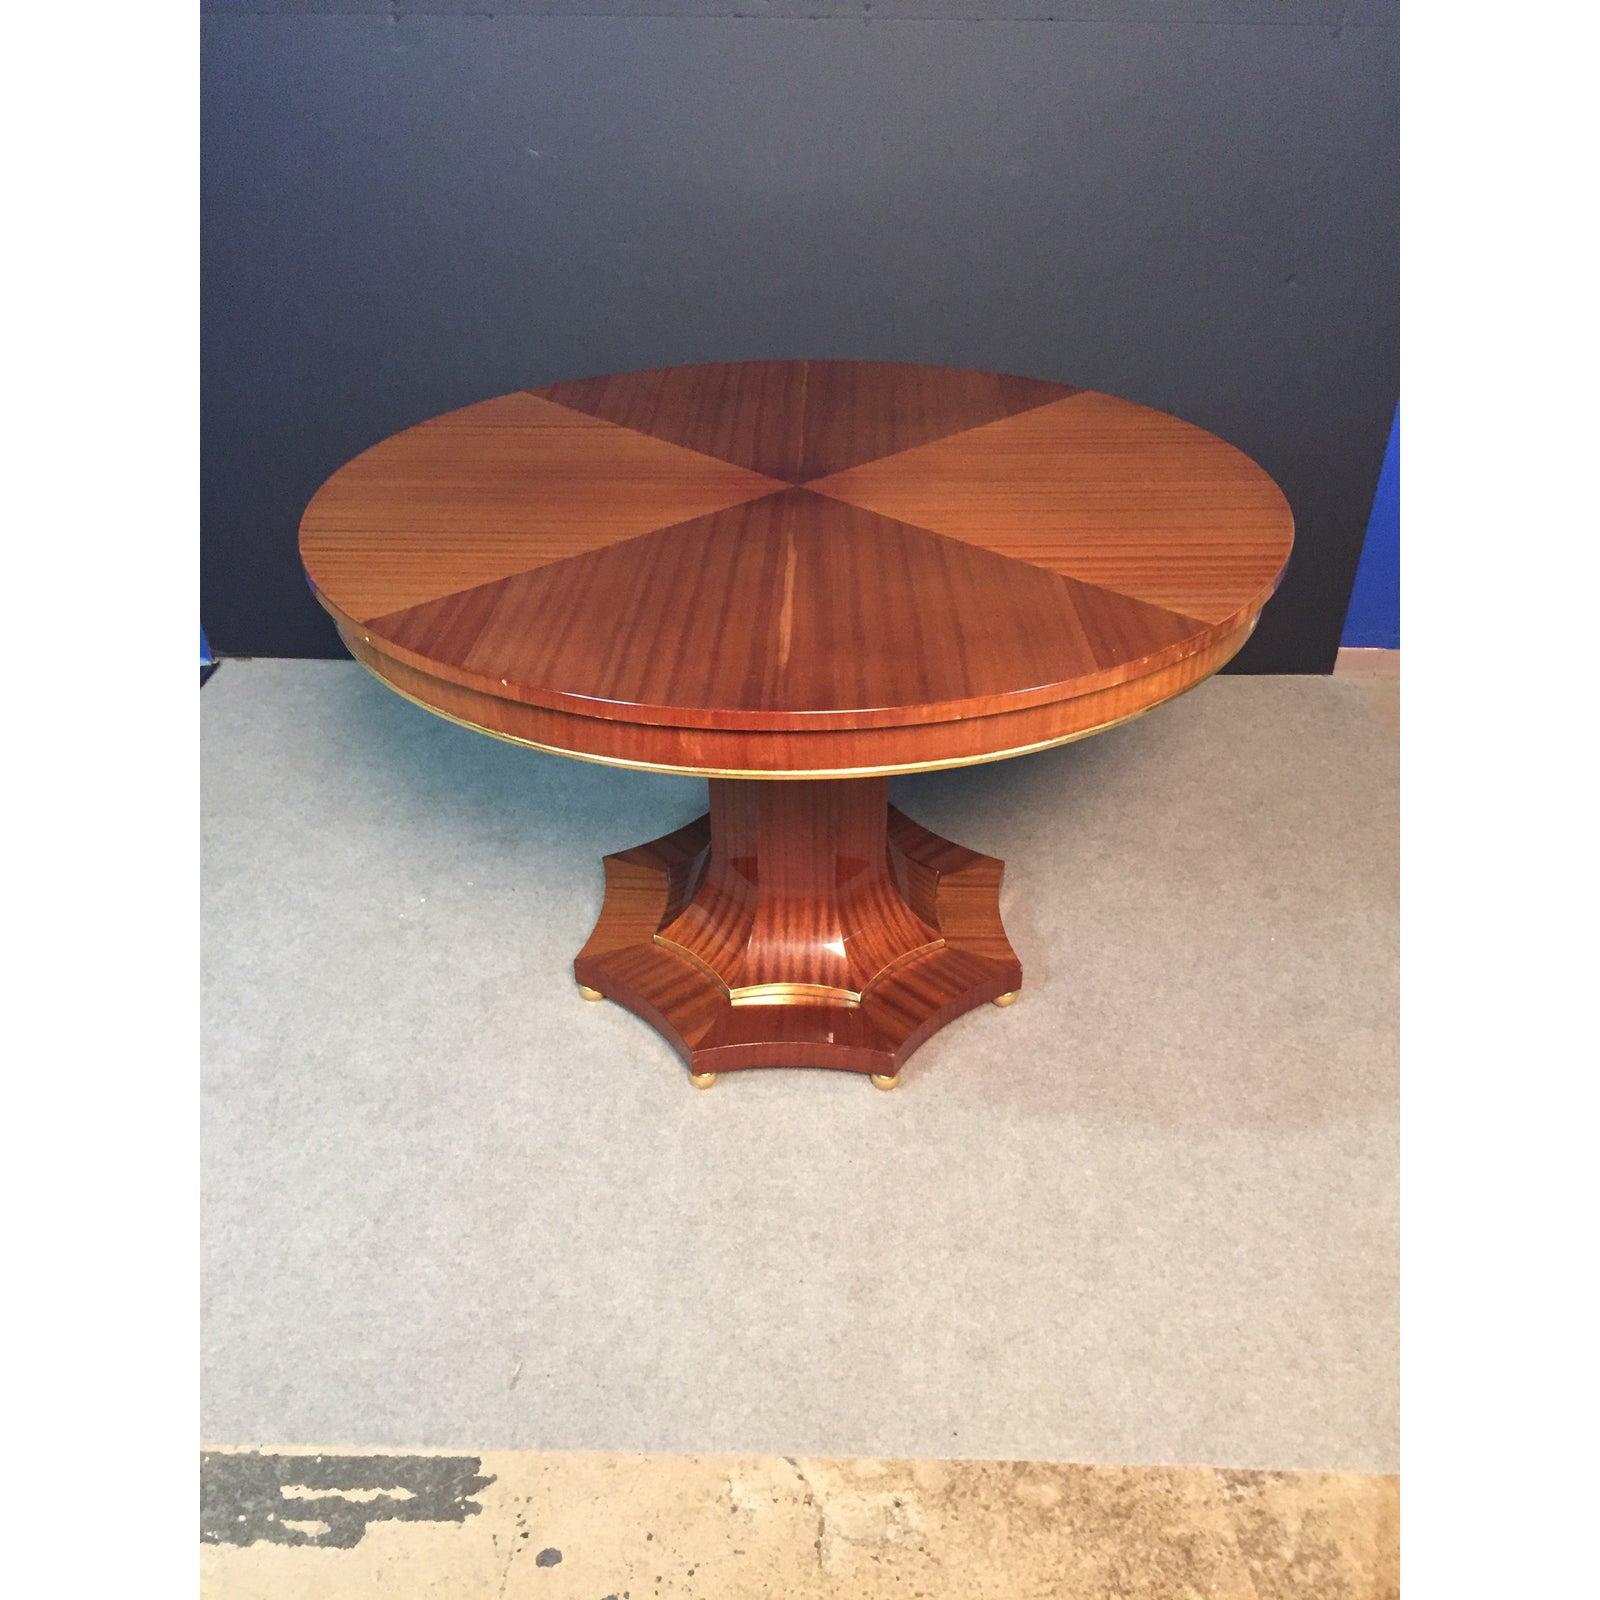 Regency style light golden mahogany center table, with a Biedermeier influence. Gilt accents. Can also be used as a dining table.